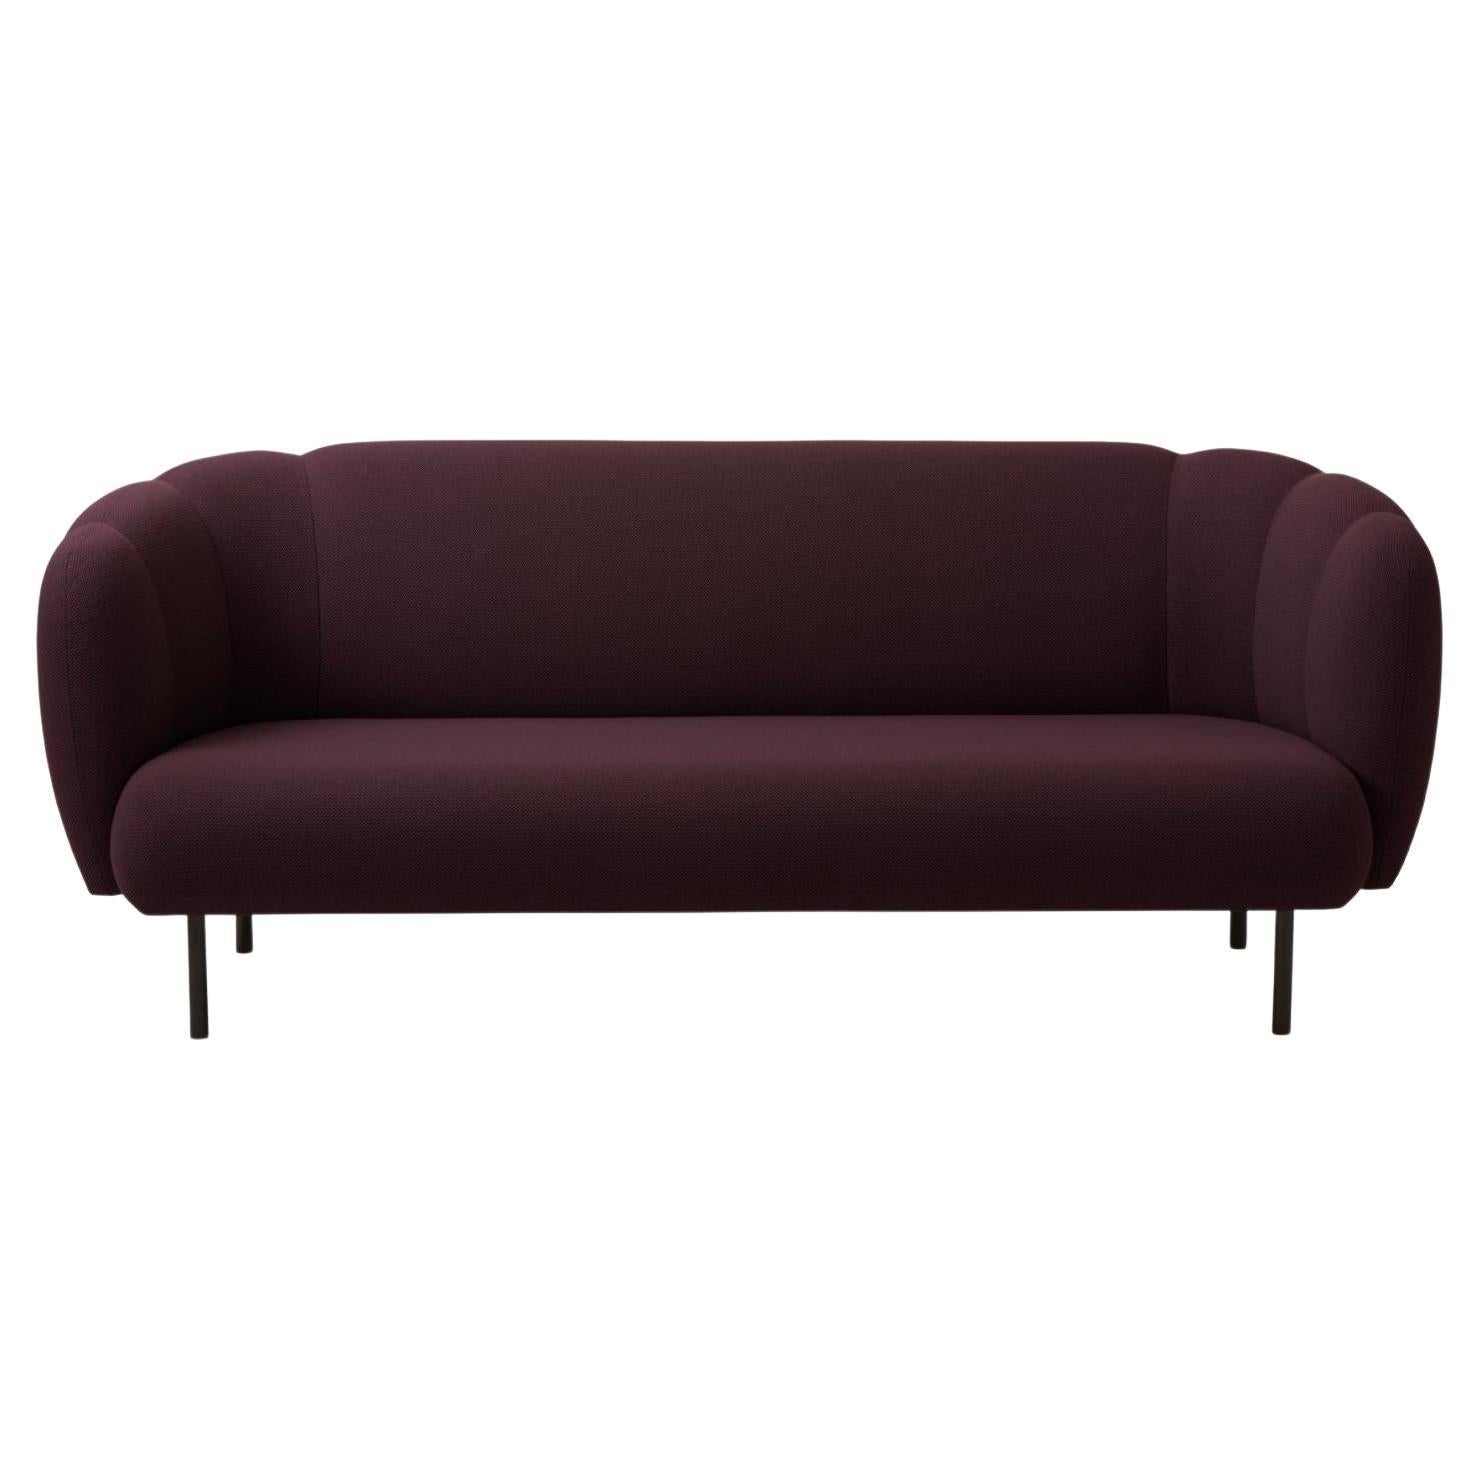 Caper 3 Seater With Stitches Burgundy by Warm Nordic For Sale